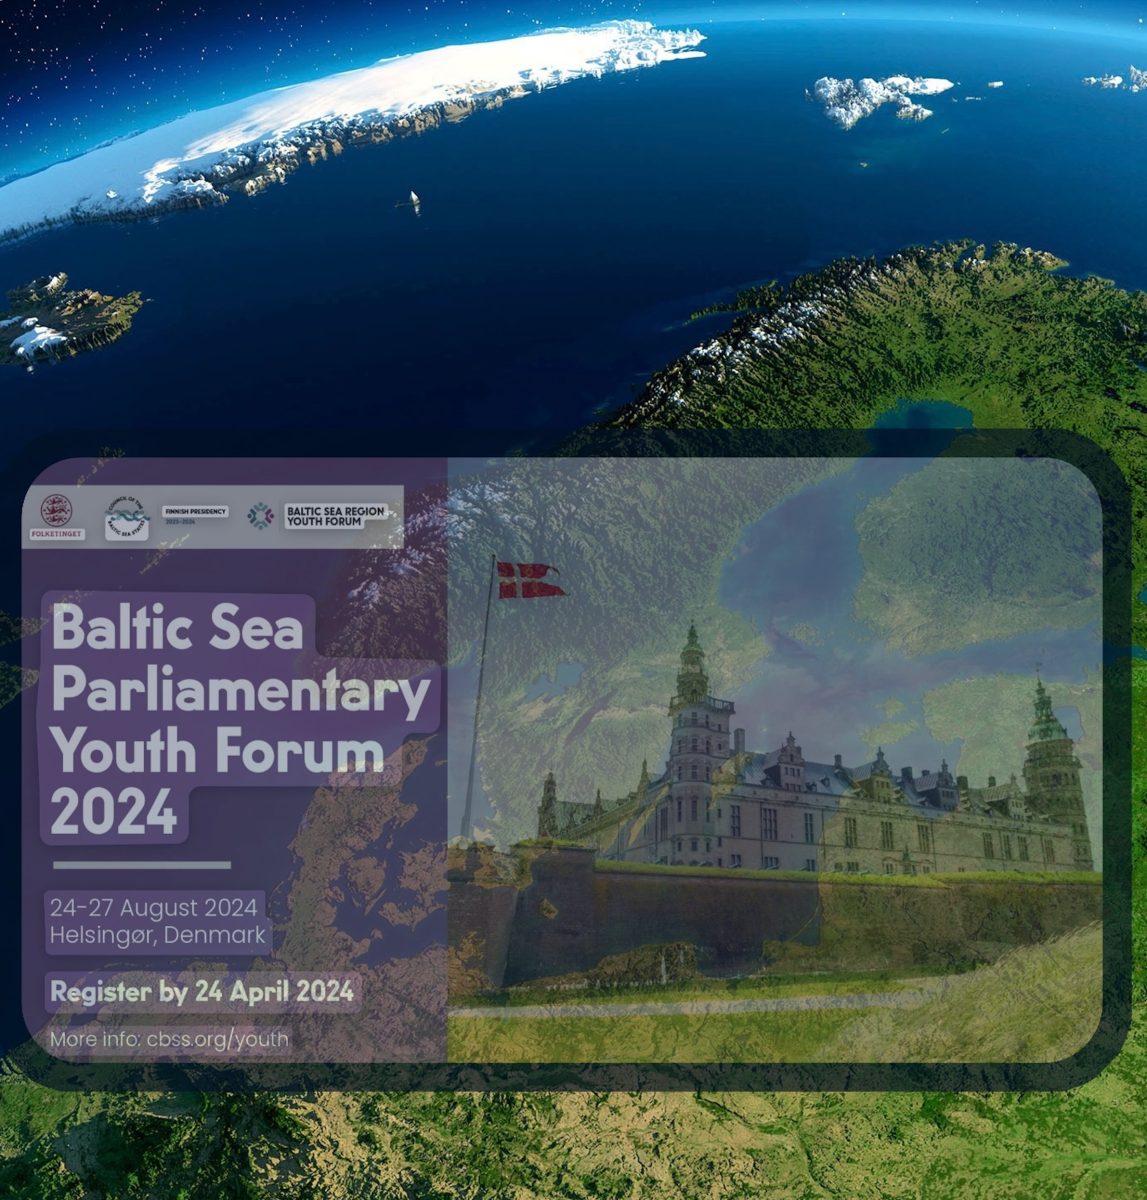 Invitation to Apply for the Baltic Sea Parliamentary Youth Forum